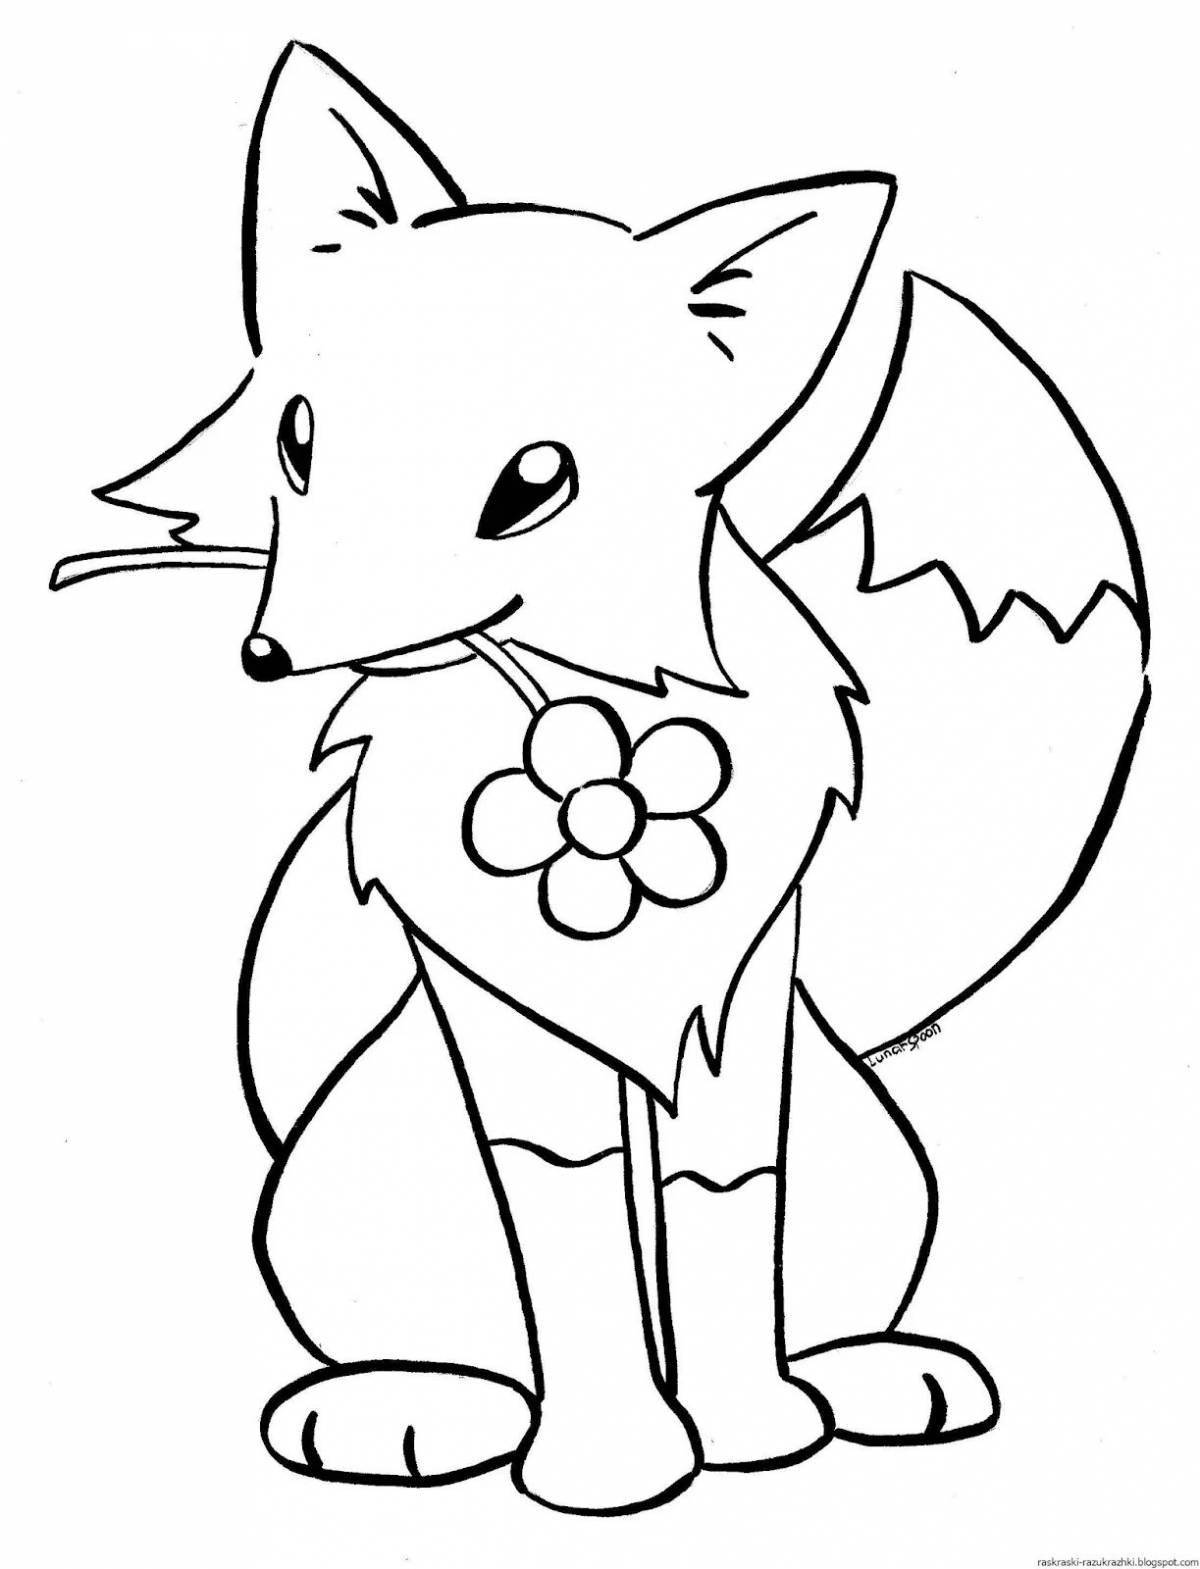 Playful fox coloring book for 2-3 year olds